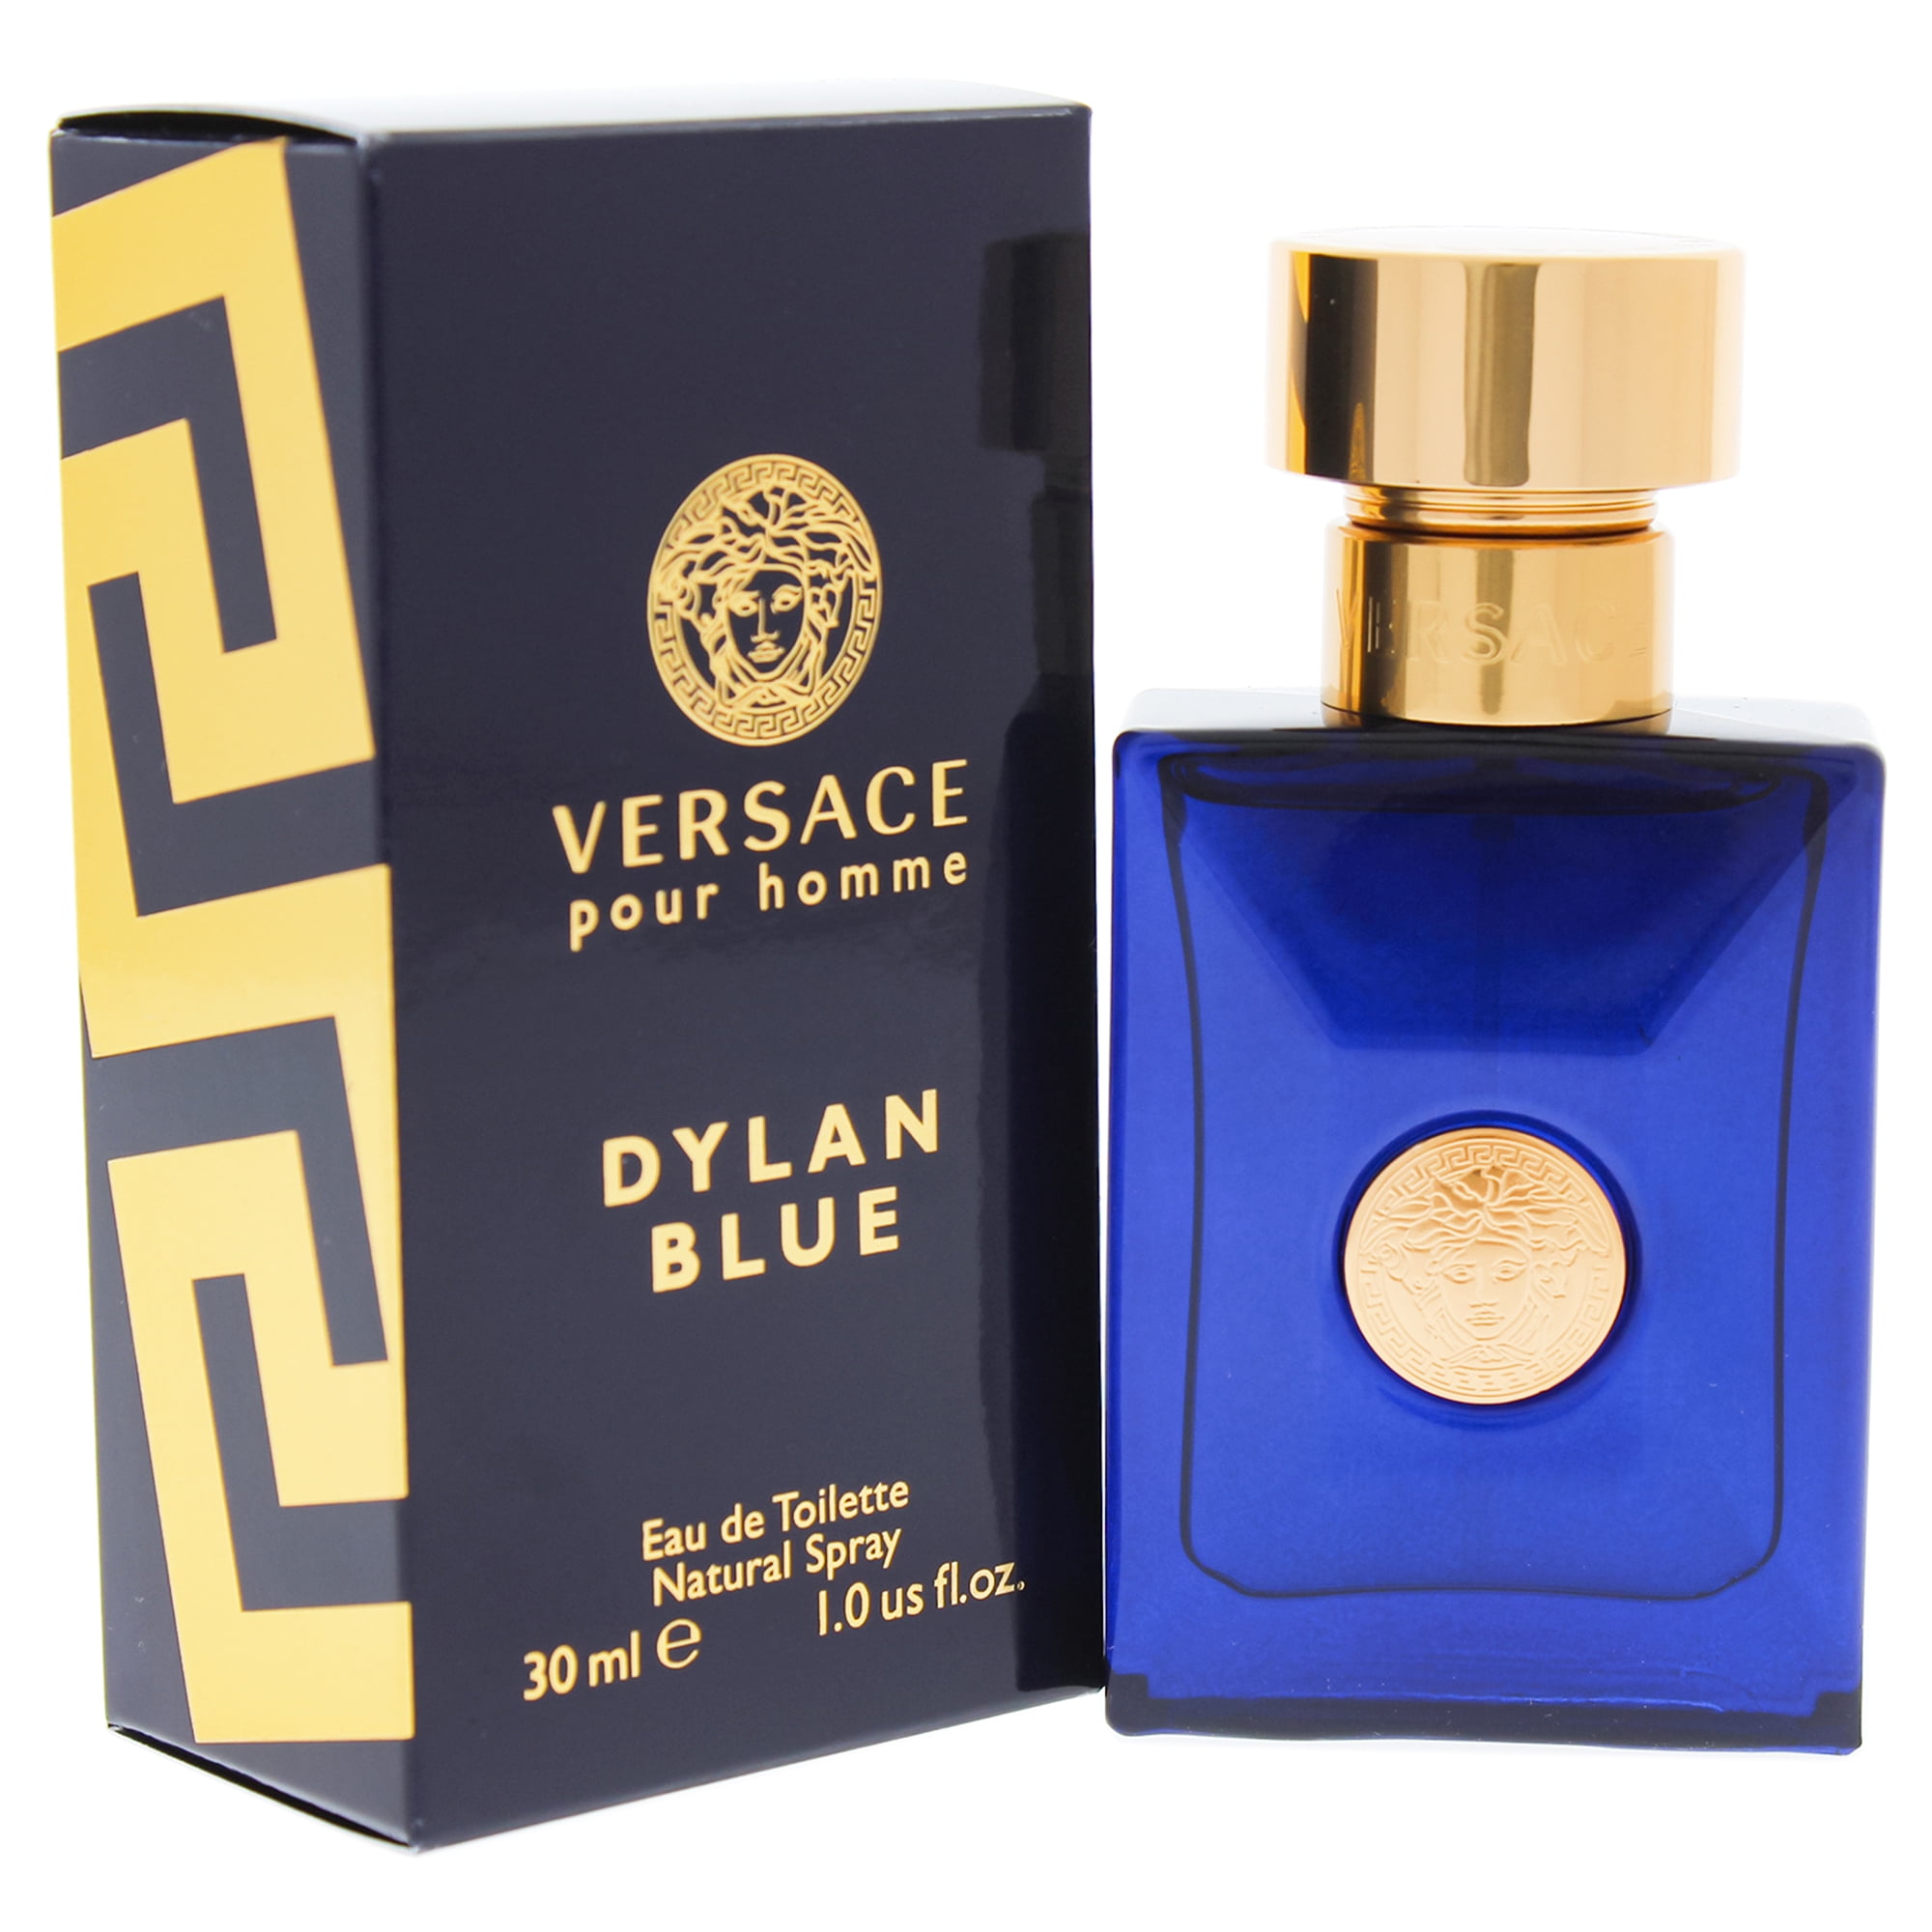 Hommes 30. Versace pour homme Dylan Blue. Versace Dylan Blue man EDT 100 мл. Versace Dylan Blue 30ml. Туалетная вода Versace Dylan Blue.